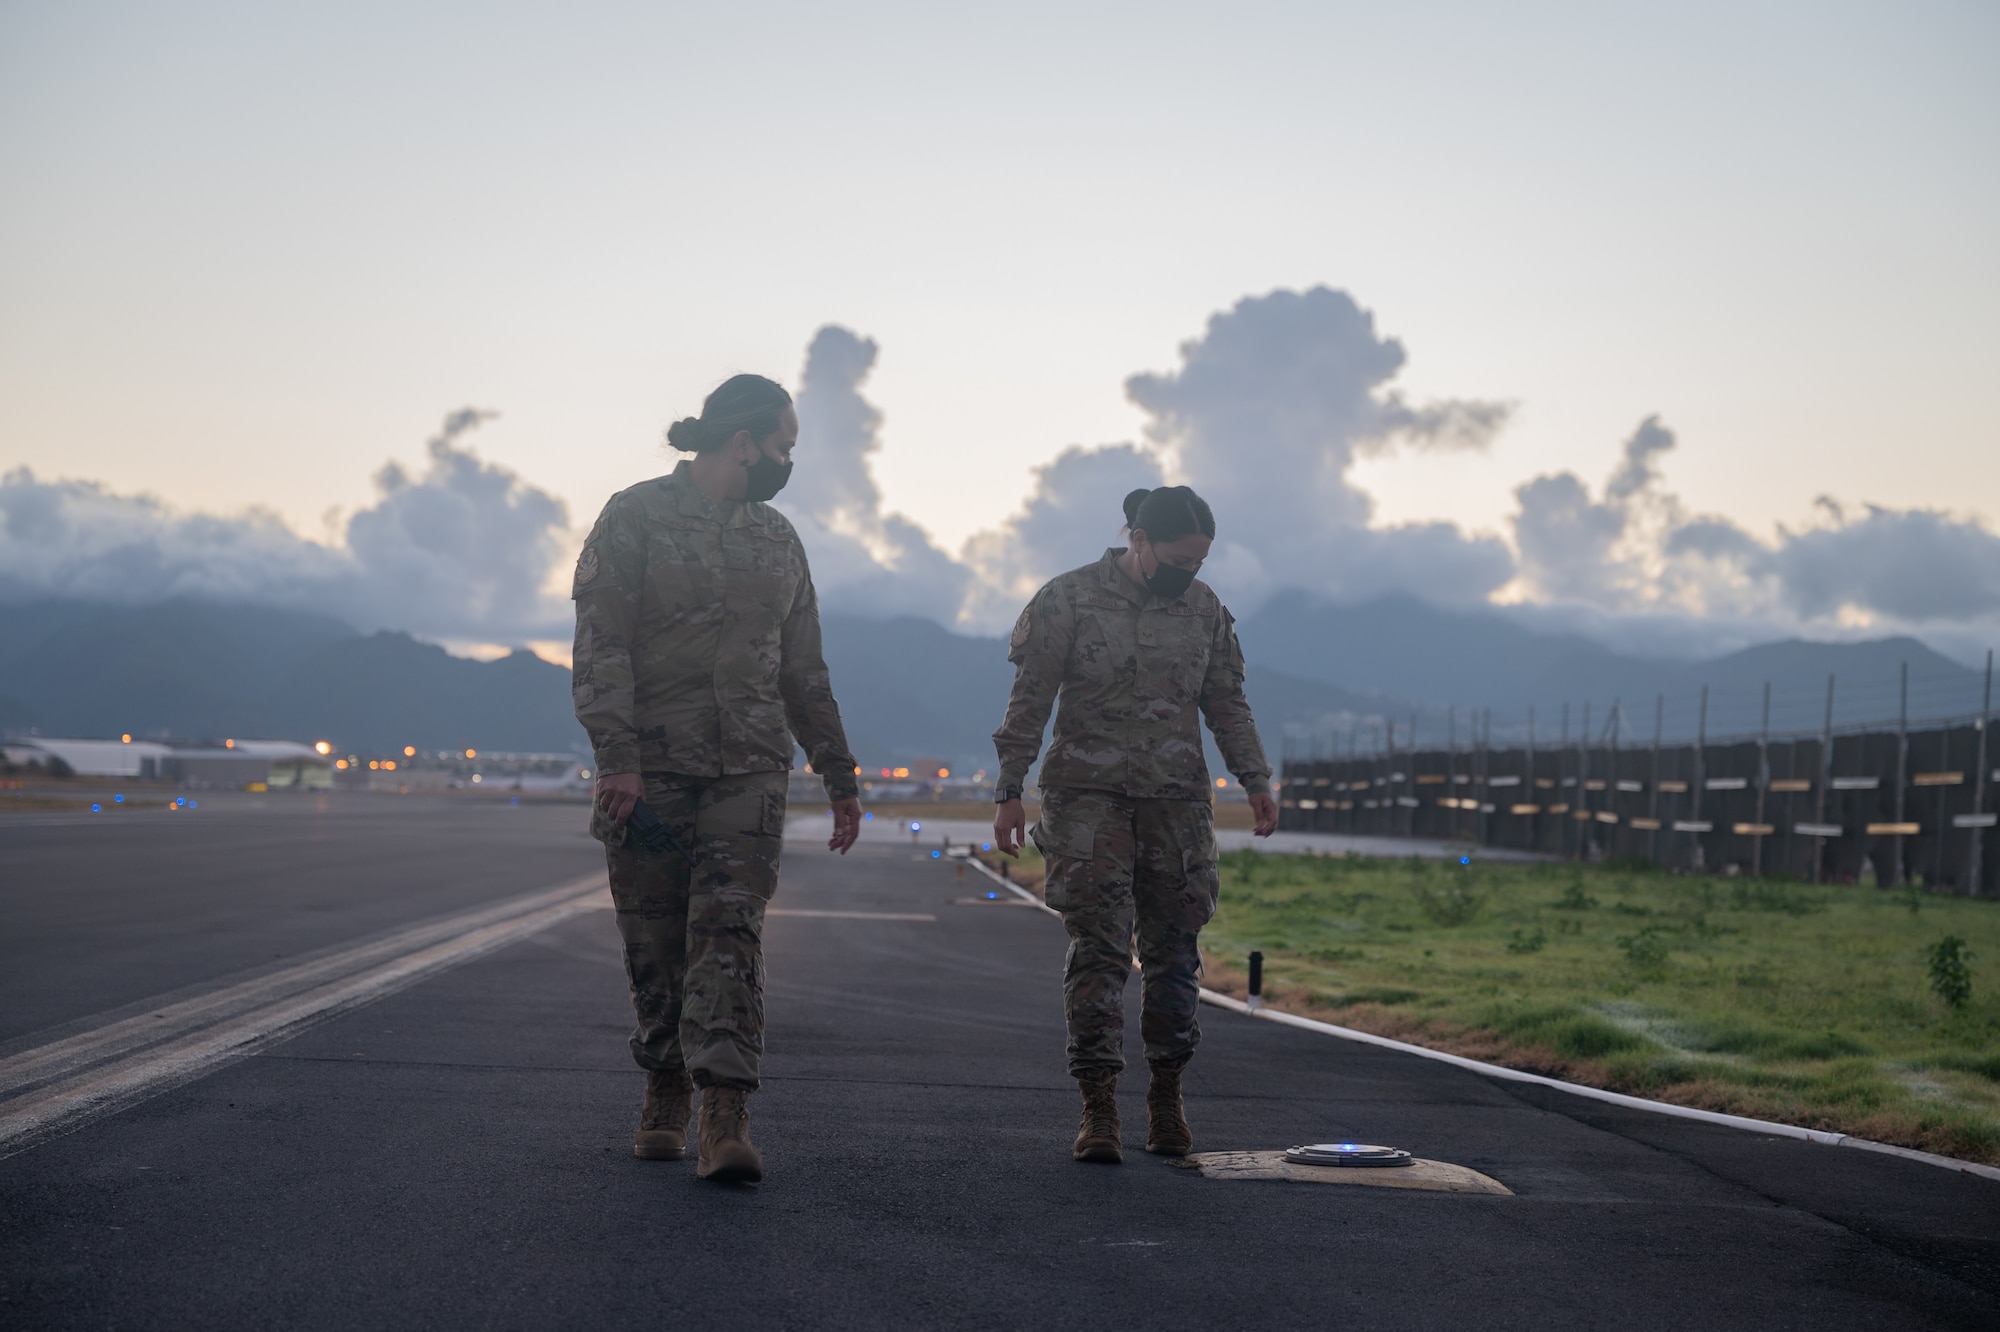 Senior Airmen Moana Melendez and Veronica Mendoza, airfield management specialists with the Hawaii Air National Guard 154th Operations Support Squadron, examine runway lights on their daily inspection before sorties begin for exercise Sentry Aloha at Joint Base Pearl Harbor-Hickam, Hawaii, Aug. 18, 2021. This small group of mission-critical service members helps to ensure the safety and success of HIANG flights out of Hickam Airfield and Daniel K. Inouye International Airport.